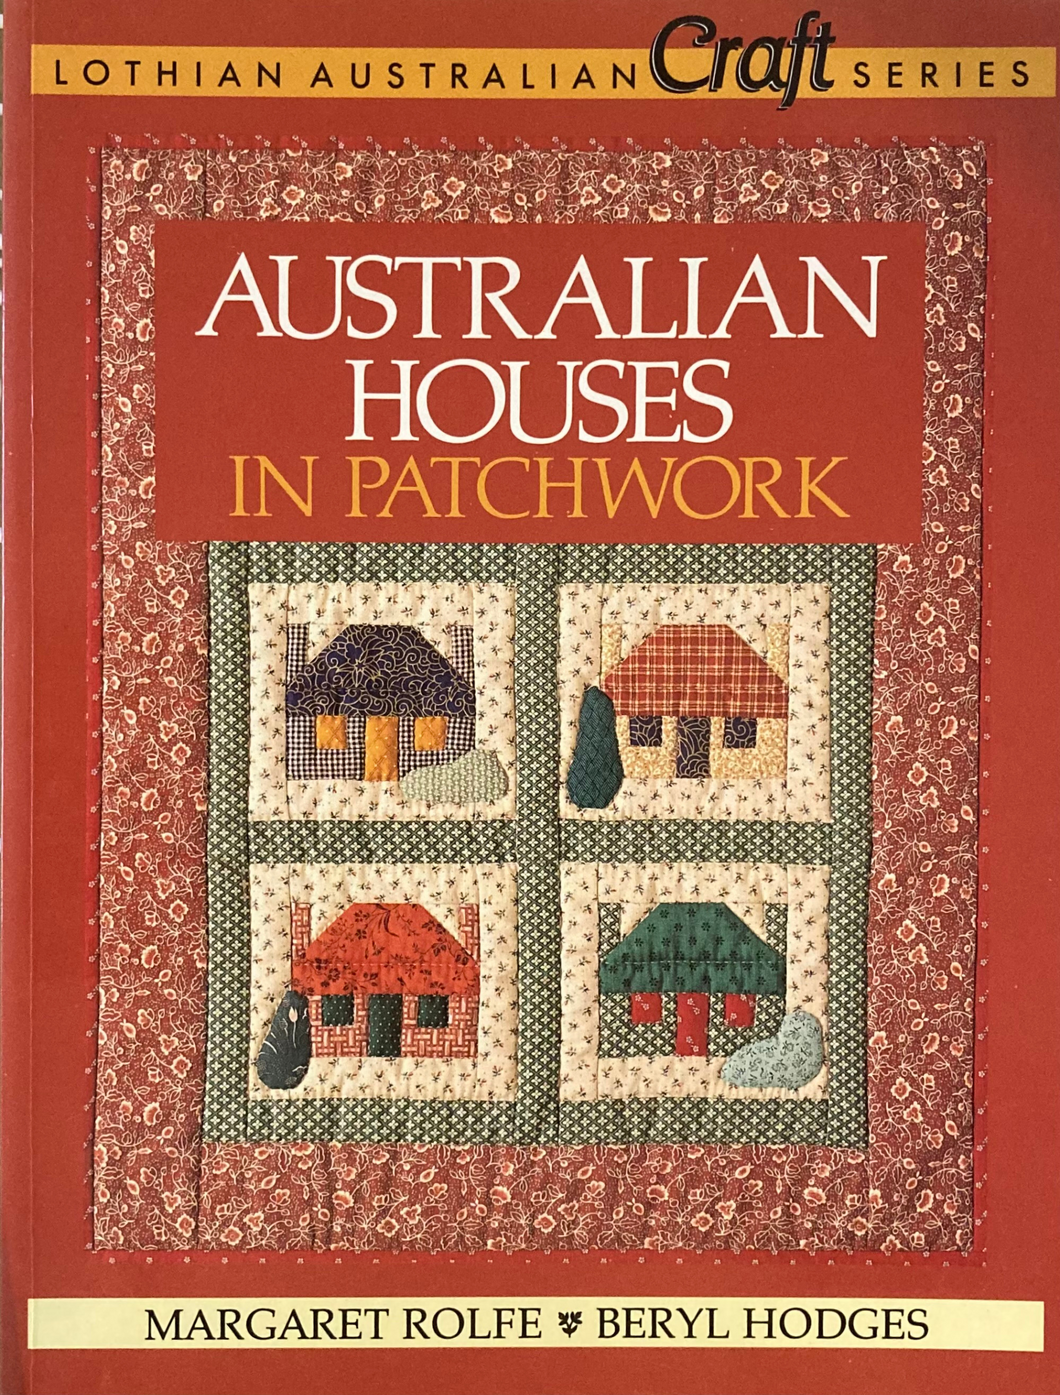 Australian Houses in Patchwork by Margaret Rolfe & Beryl Hodges